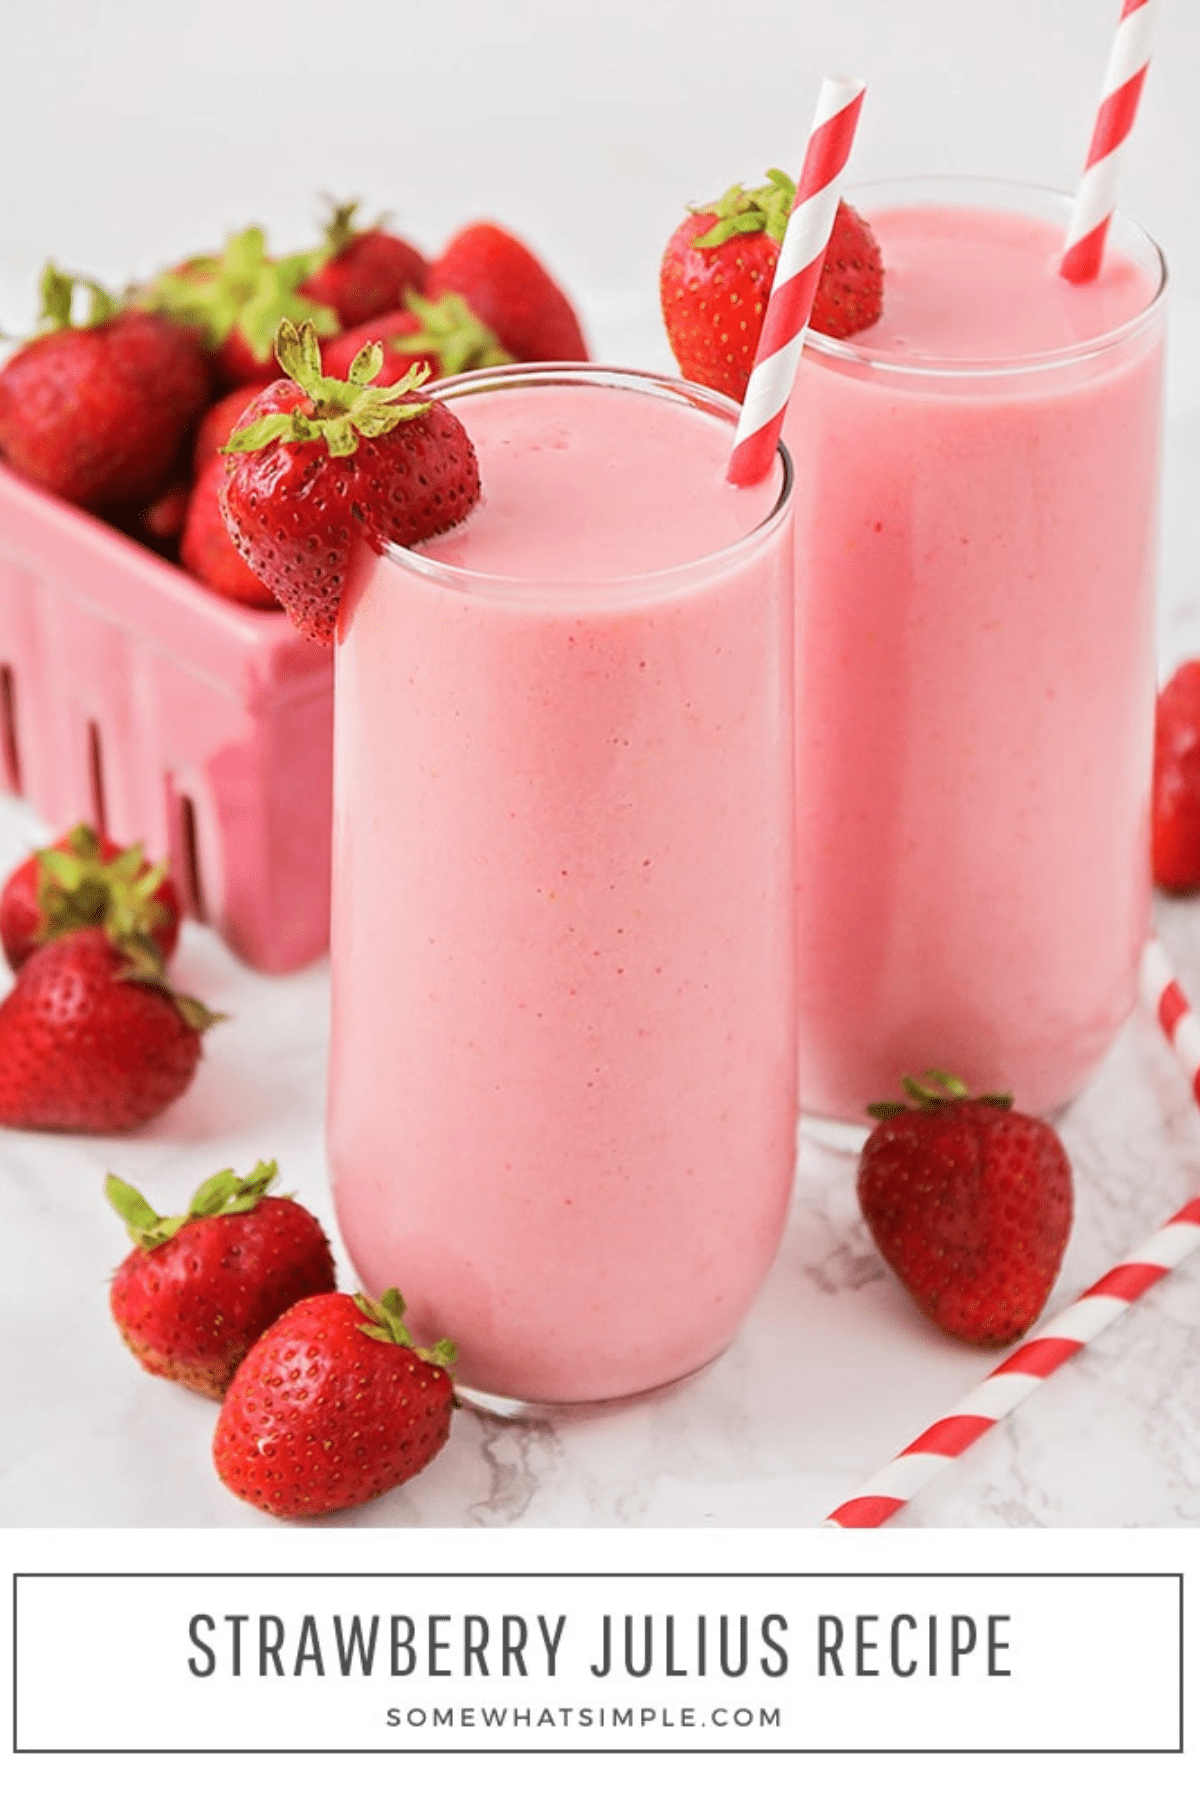 Made with simple ingredients and bursting with fresh strawberry flavor, this delightful Strawberry Julius recipe is sure to become a new summer favorite. via @somewhatsimple